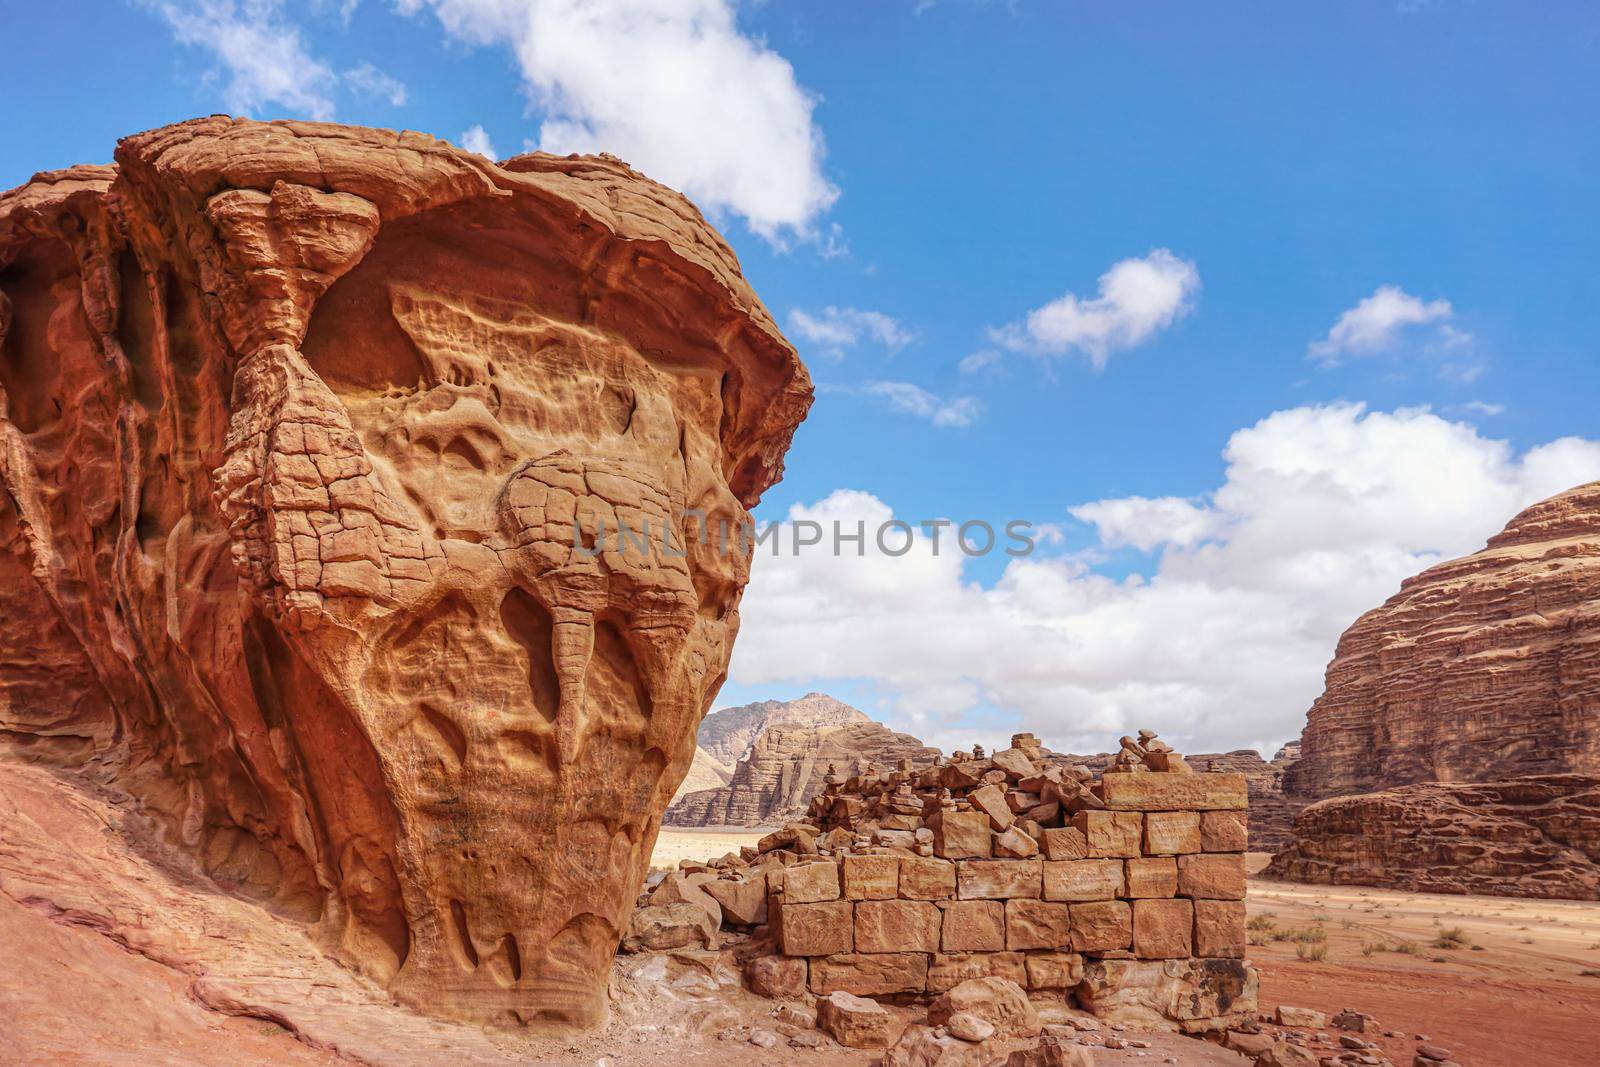 Stone bricks wall remains with rocky cliffs near on Wadi Rum desert near Lawrence's Spring tourist spot by Ivanko